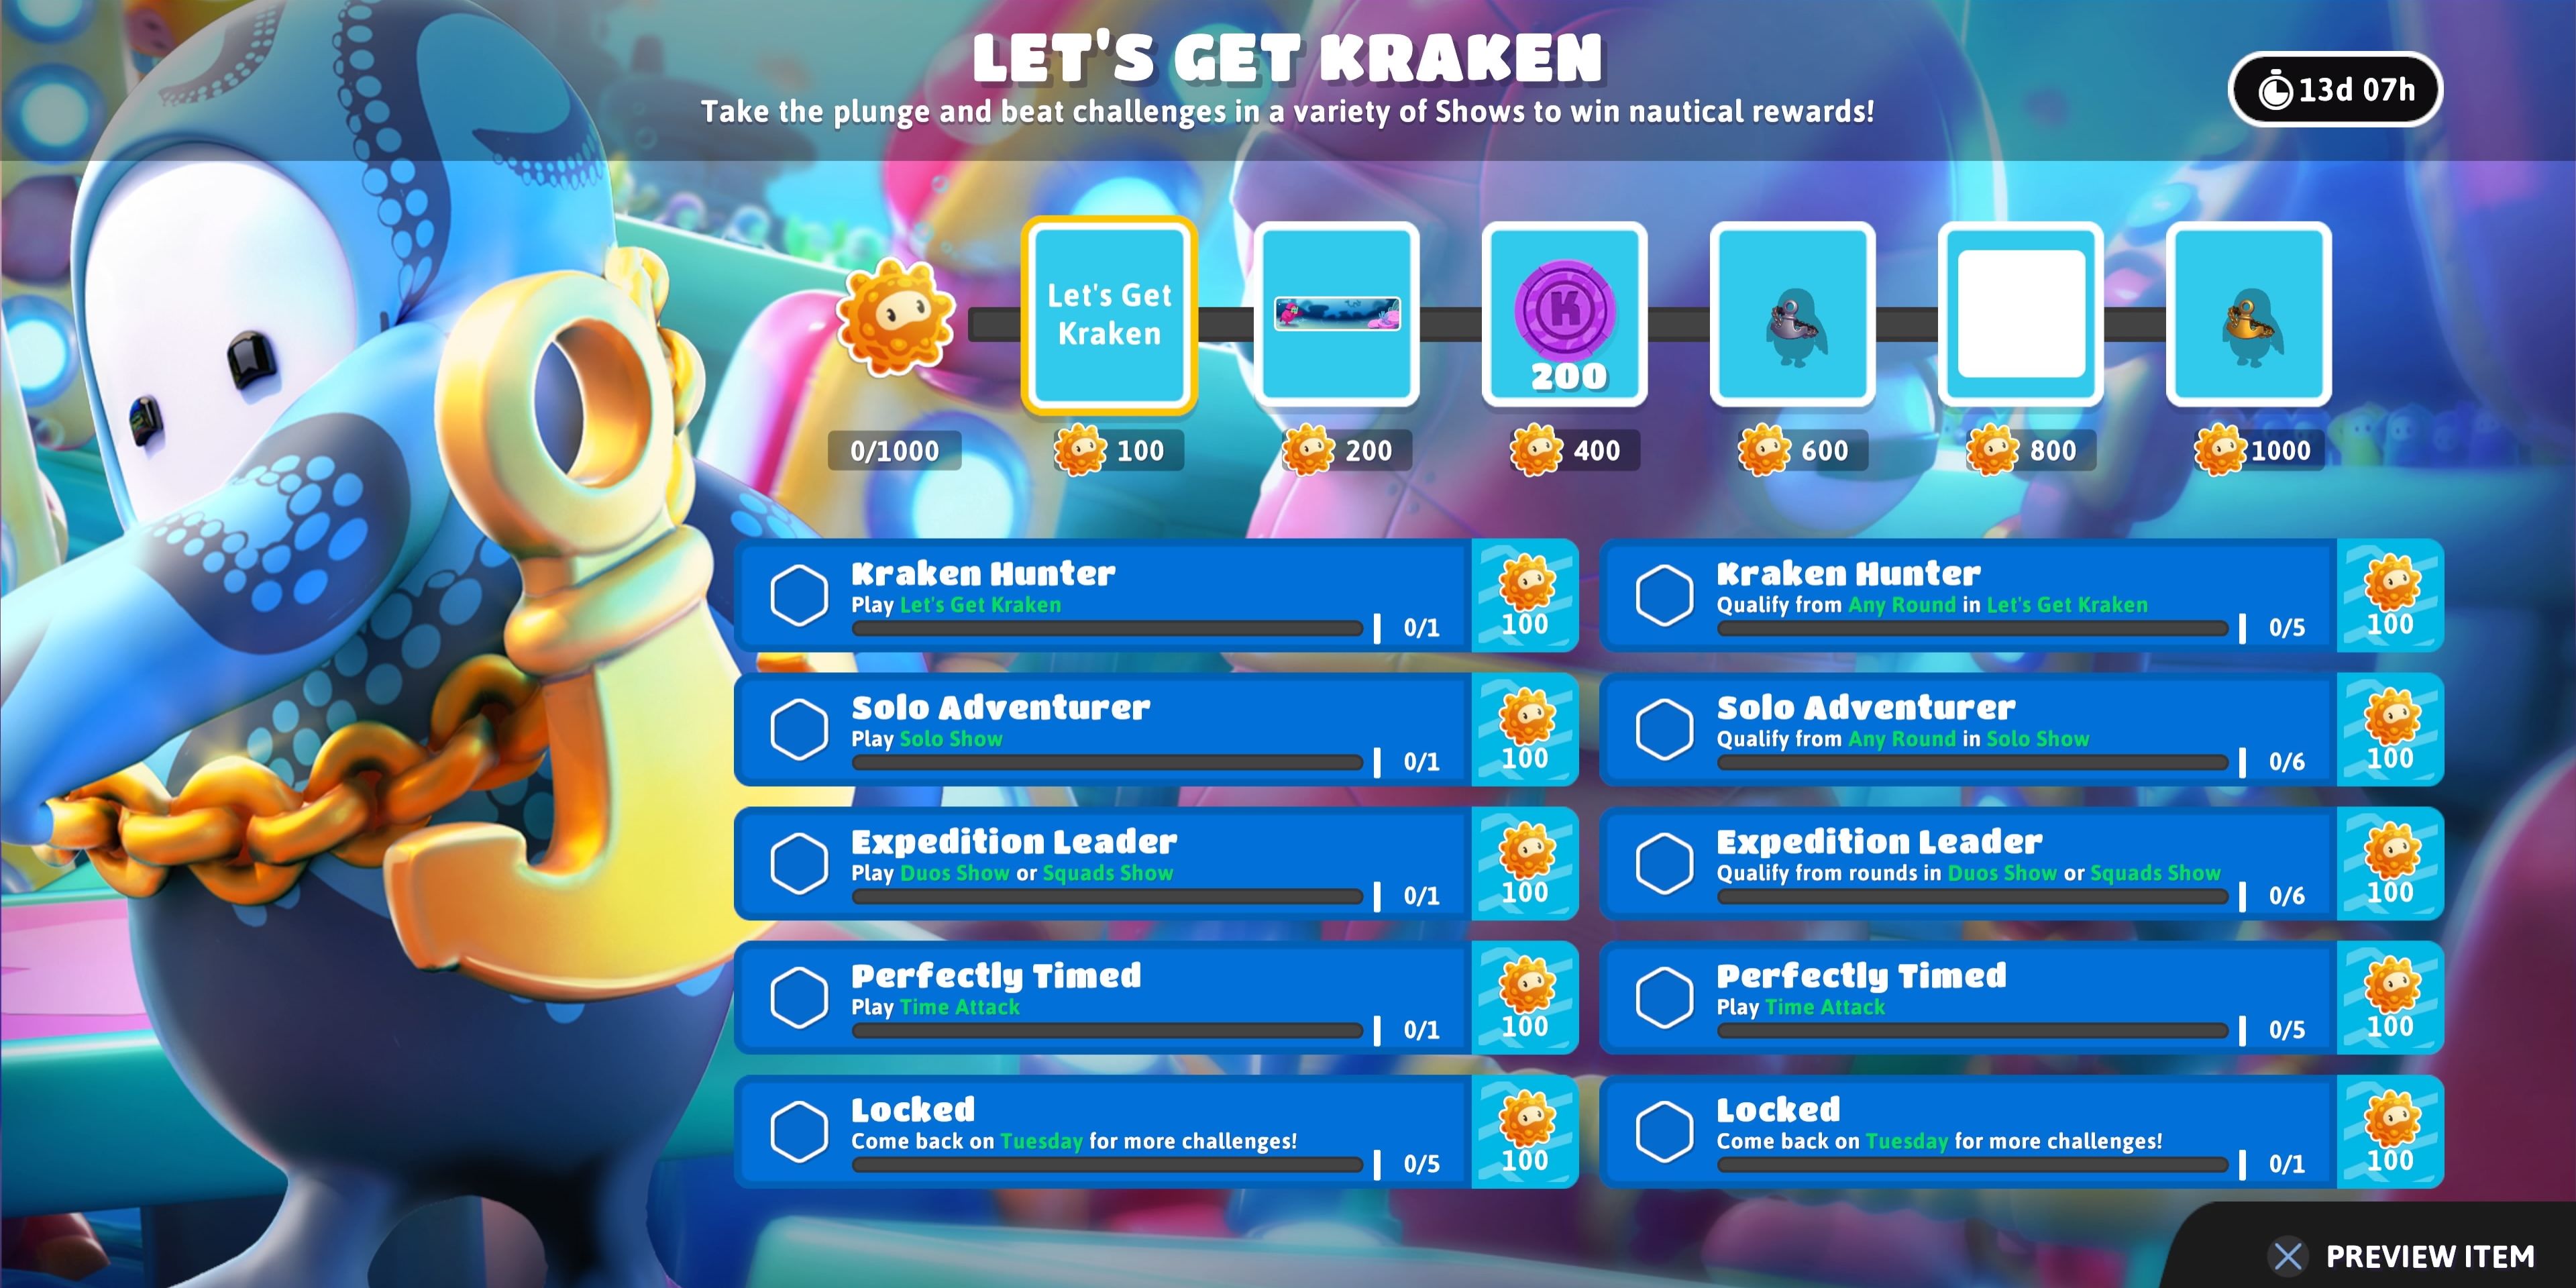 The Fall Guys Let's Get Kraken Event screen showing all challenges and rewards